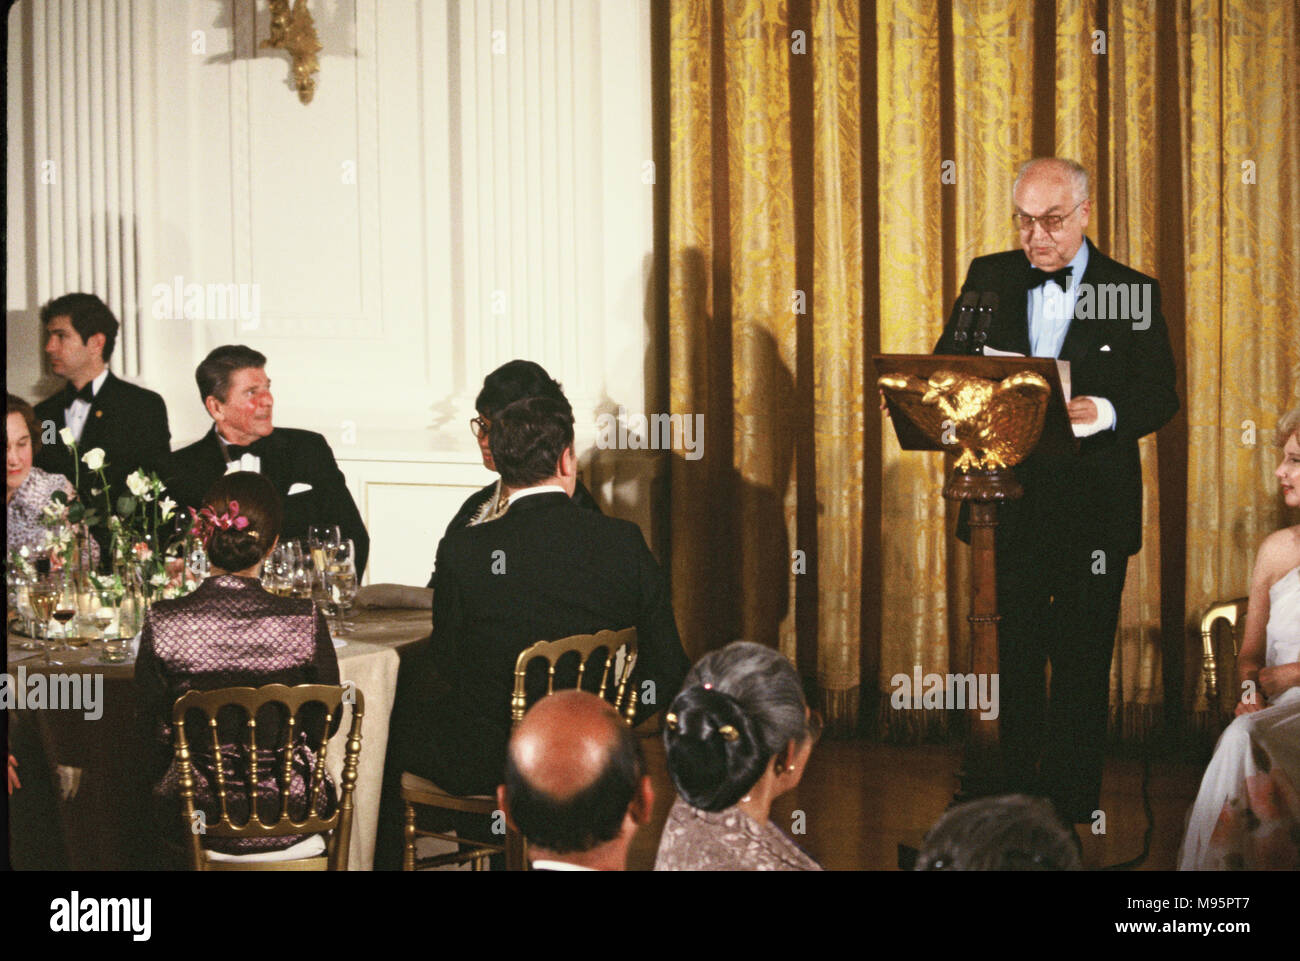 President Roanld Reagan listens to Ambassador Anatoly Dobrynin, Dean of the diplomatic corps, at a State Dinner for the Diplomatic Corps in the State Dining Room of the White House on February 19, 1982   Photograph by Dennis Brack Stock Photo